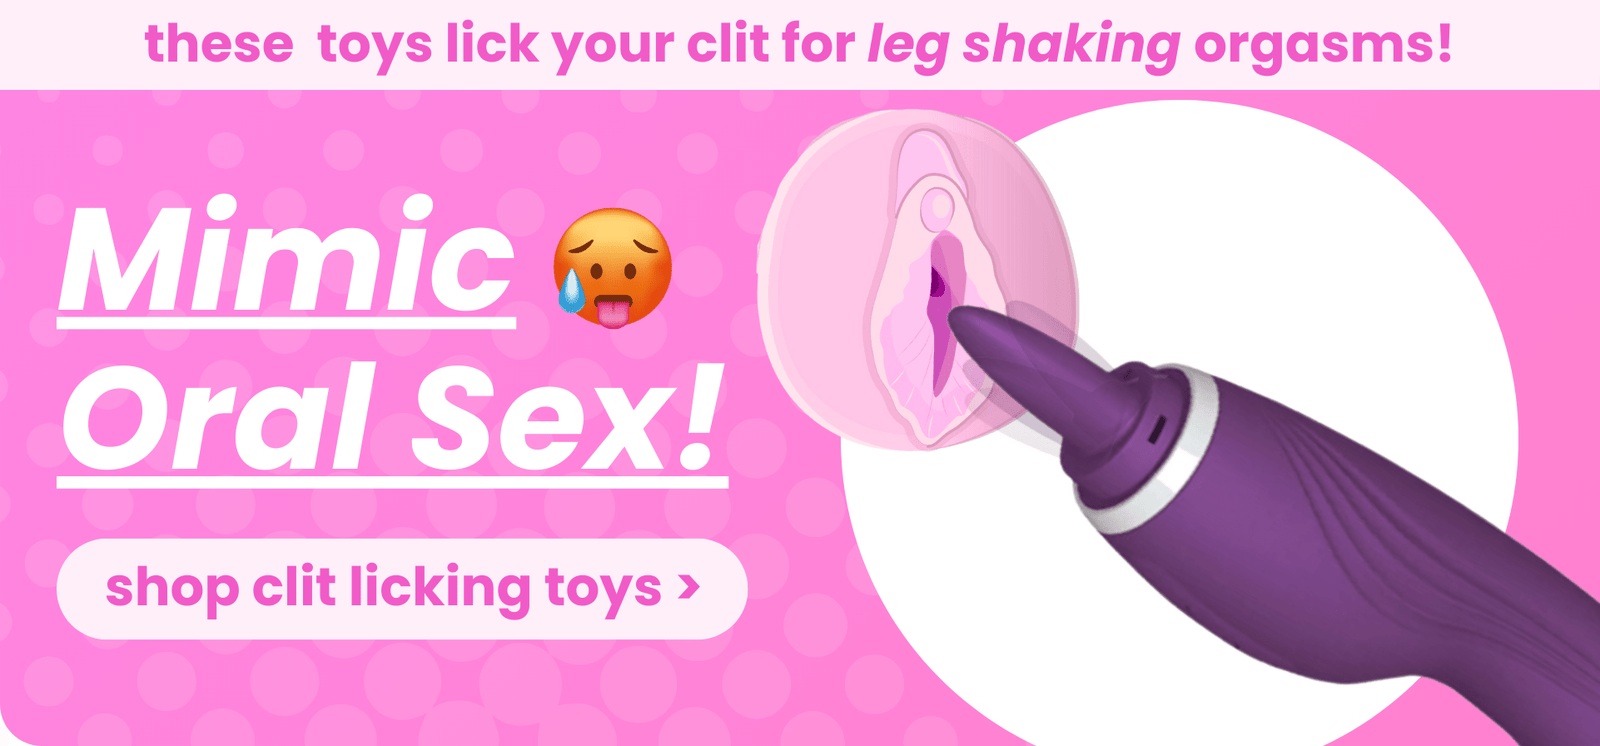 the best clit licking toys for leg shaking orgasms! These toys mimic oral sex. Shop the collection.